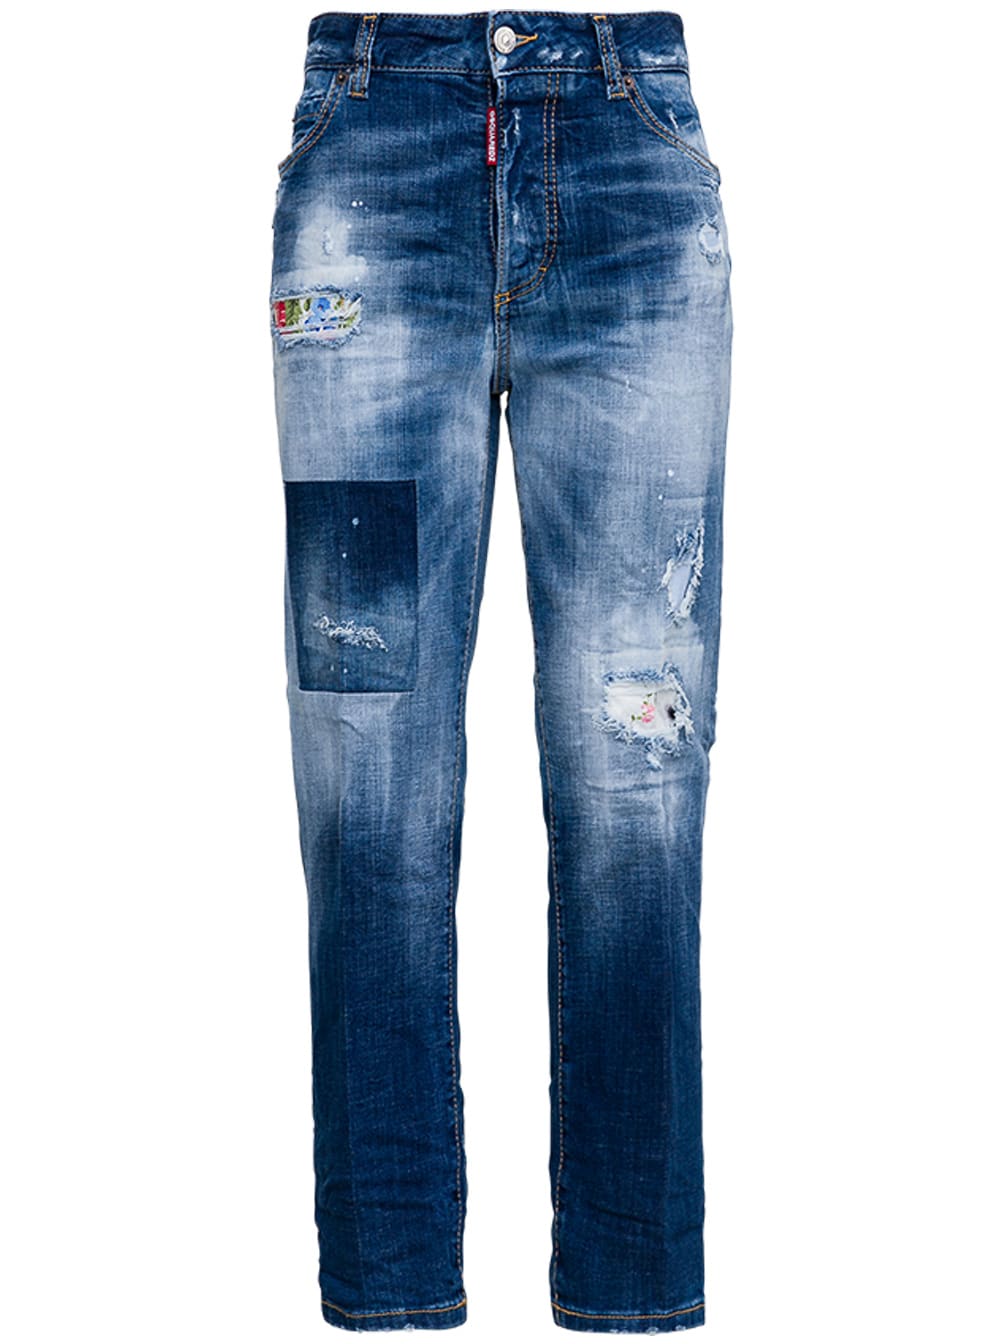 Dsquared2 Boston Jeans In Denim With Ripped Details